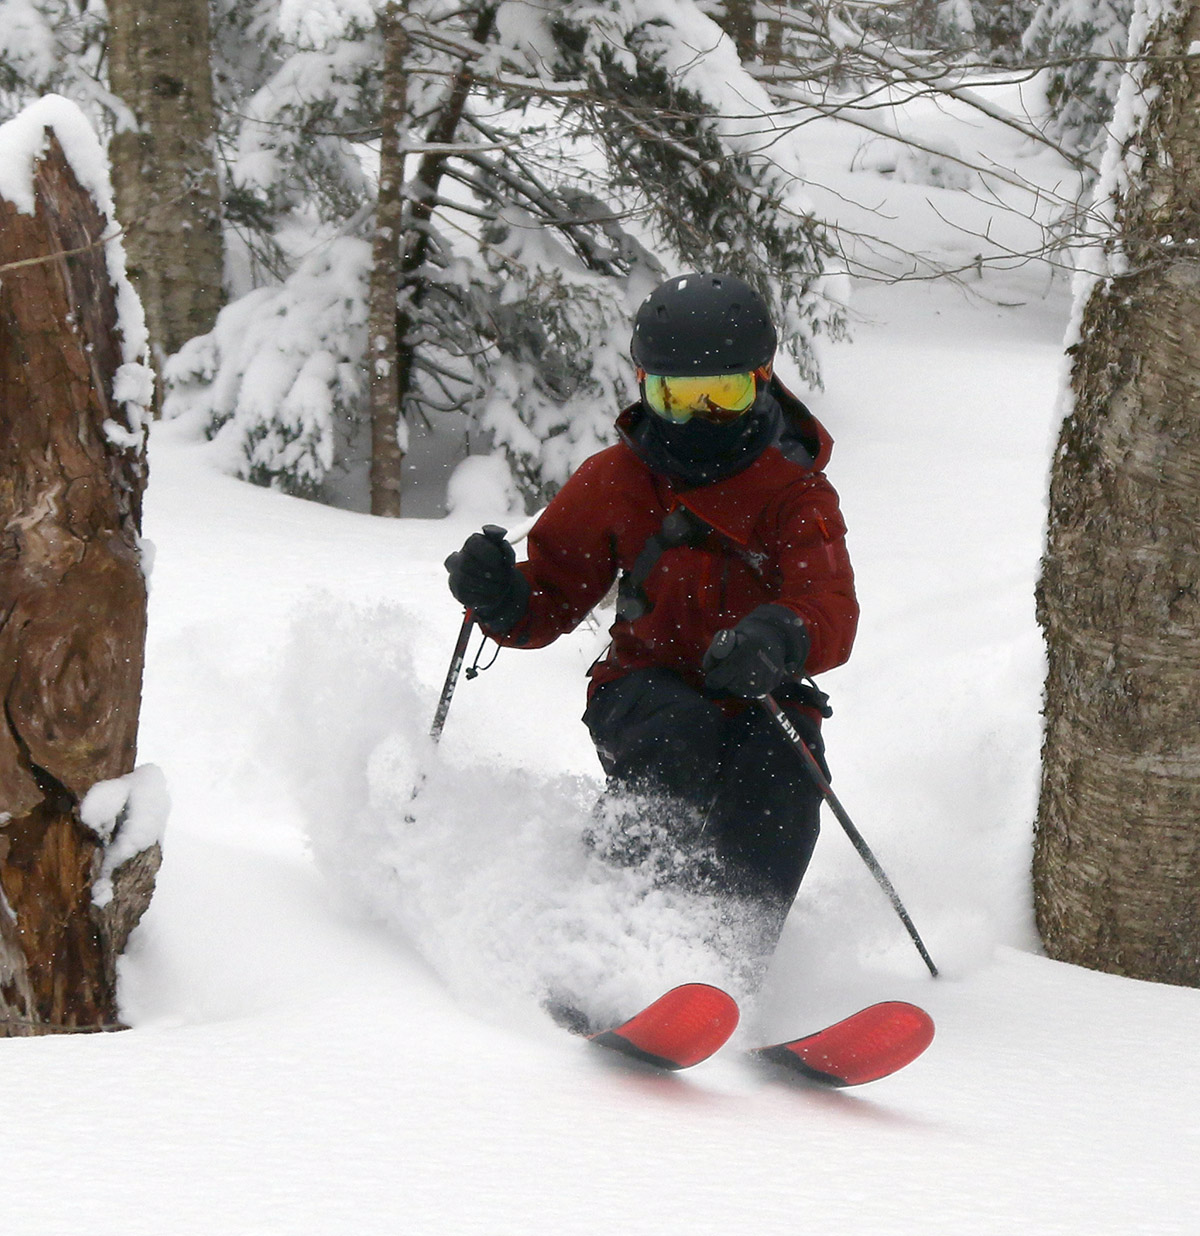 An image of Dylan skiing powder snow among the trees at Bolton Valley Ski Resort in Vermont